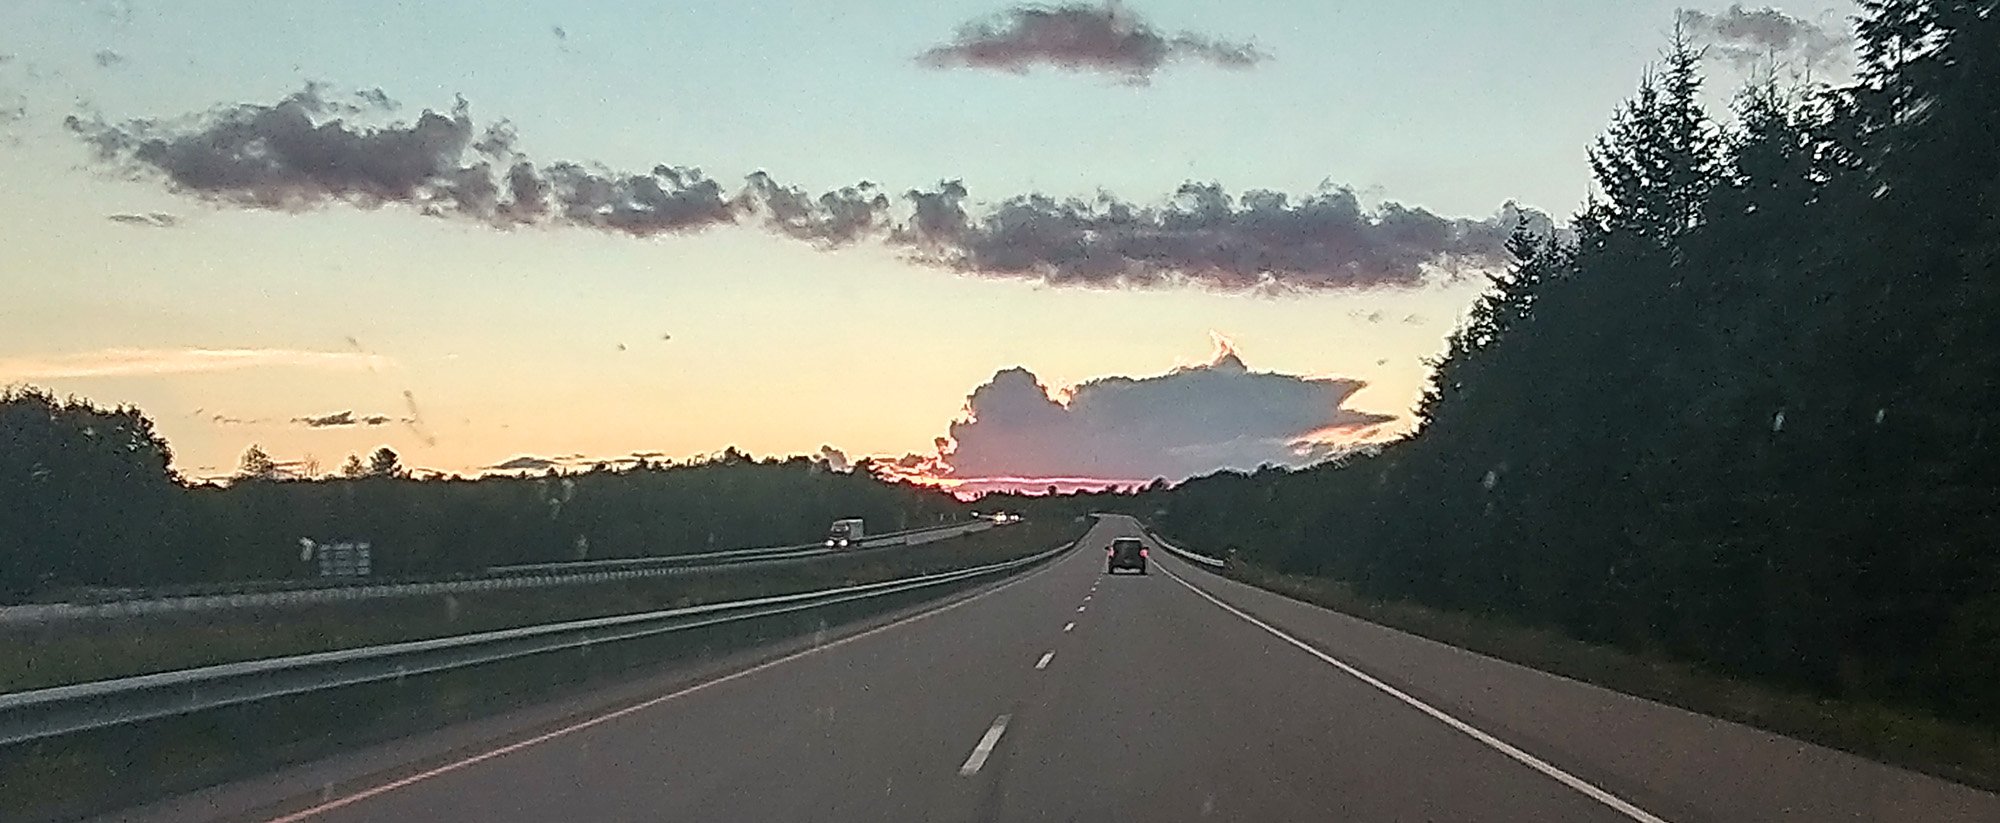 My attempt to take a sunset picture while driving. 